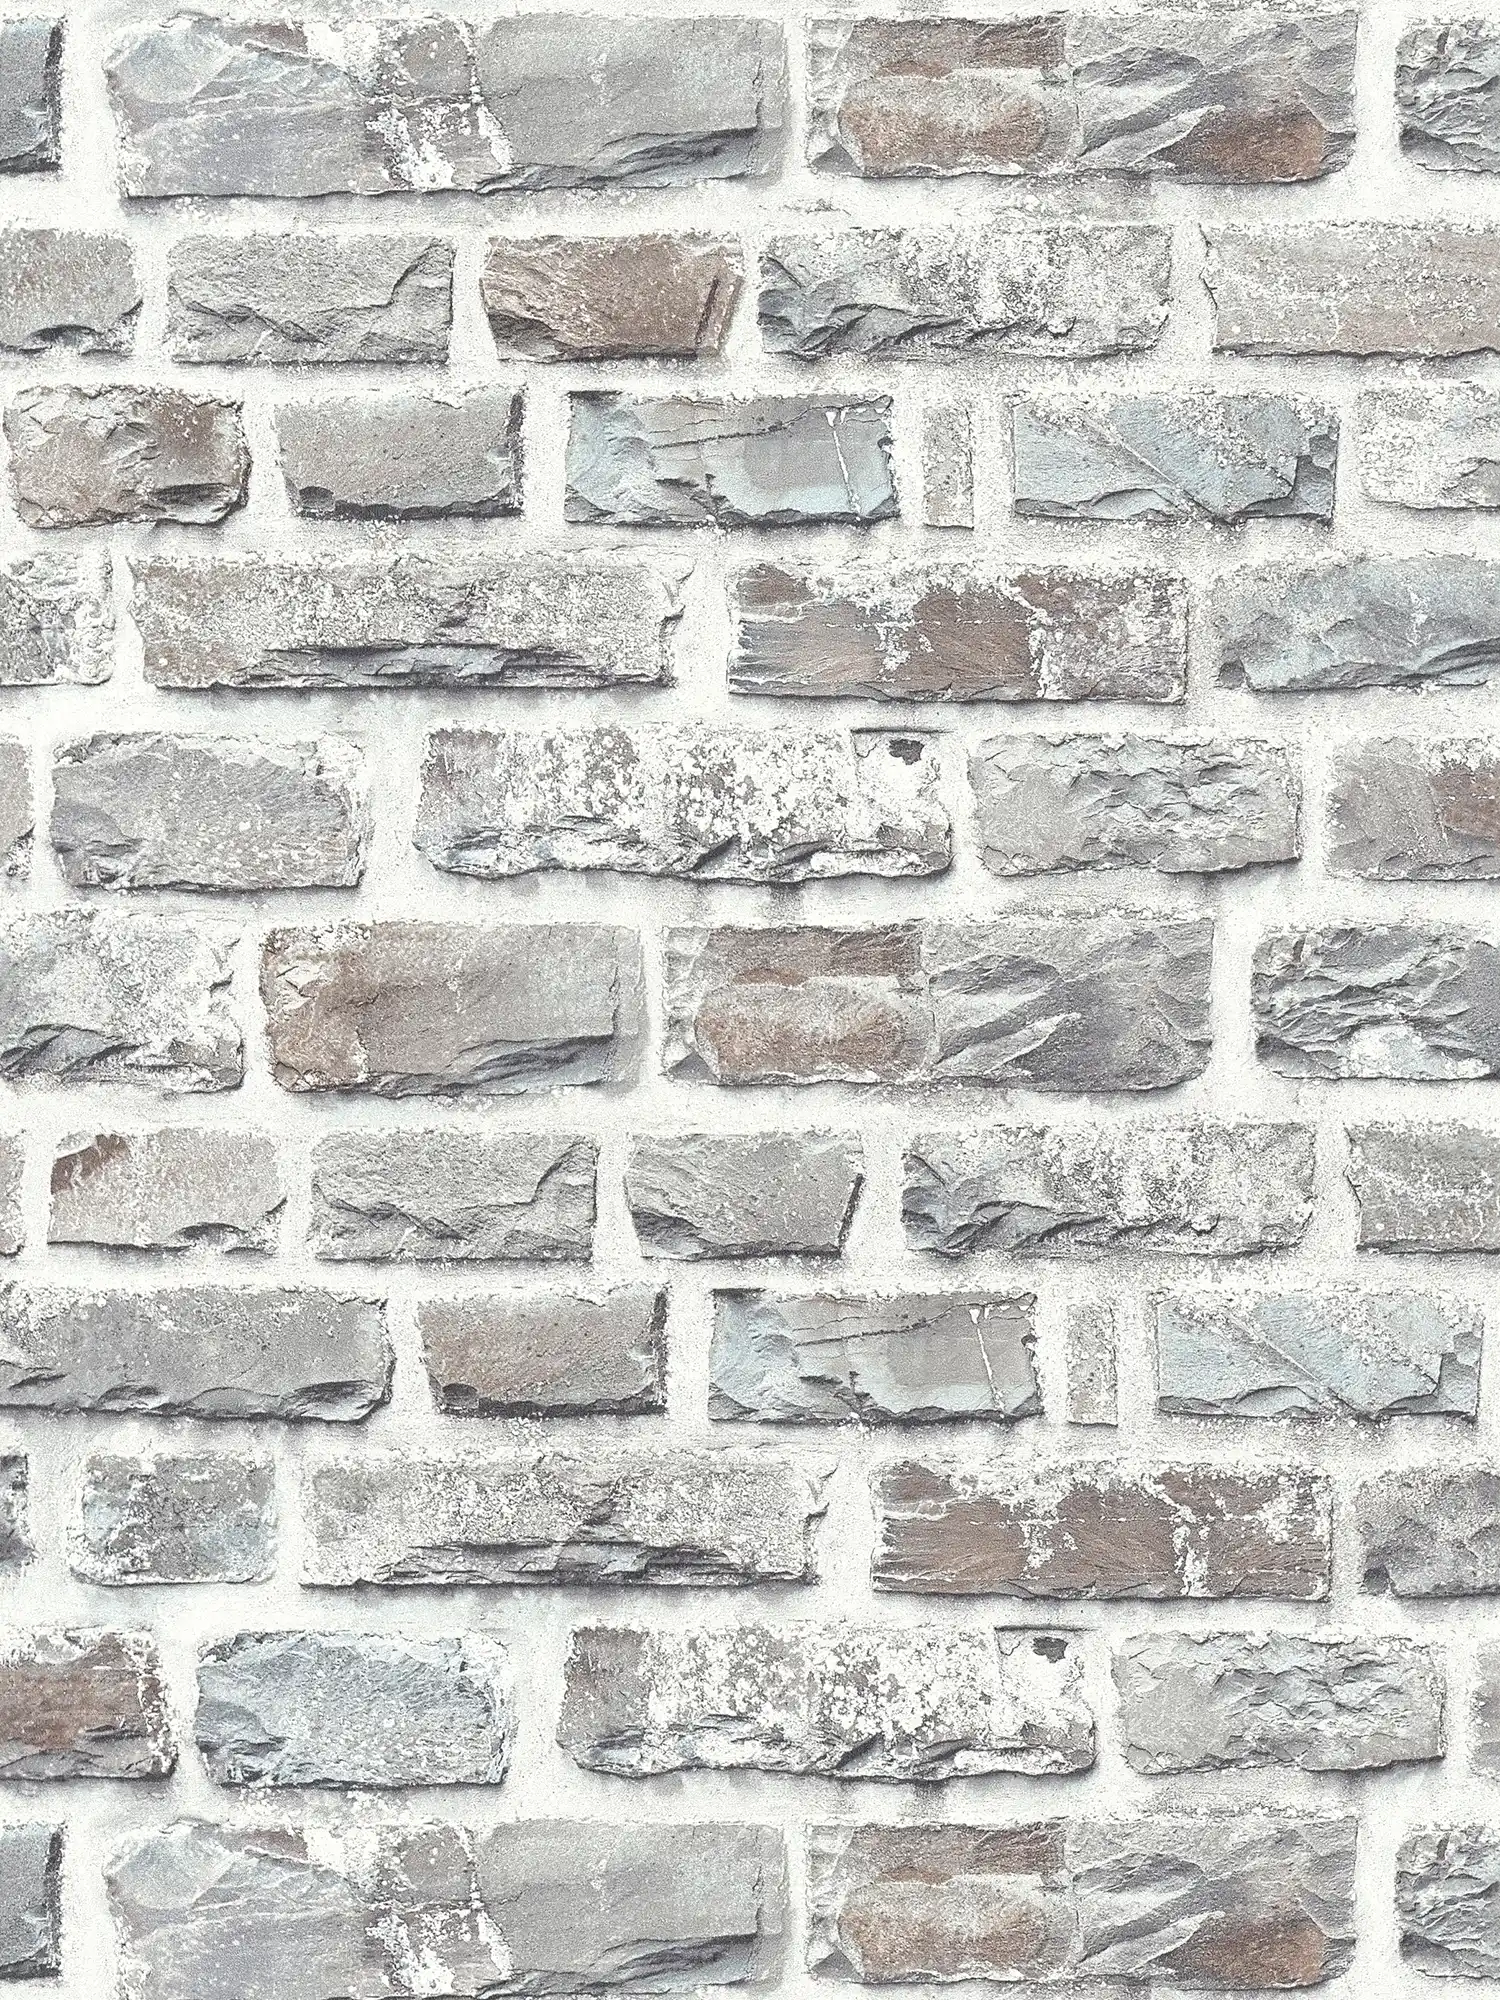         Wallpaper in stone look with quarry stones, natural stone - grey
    